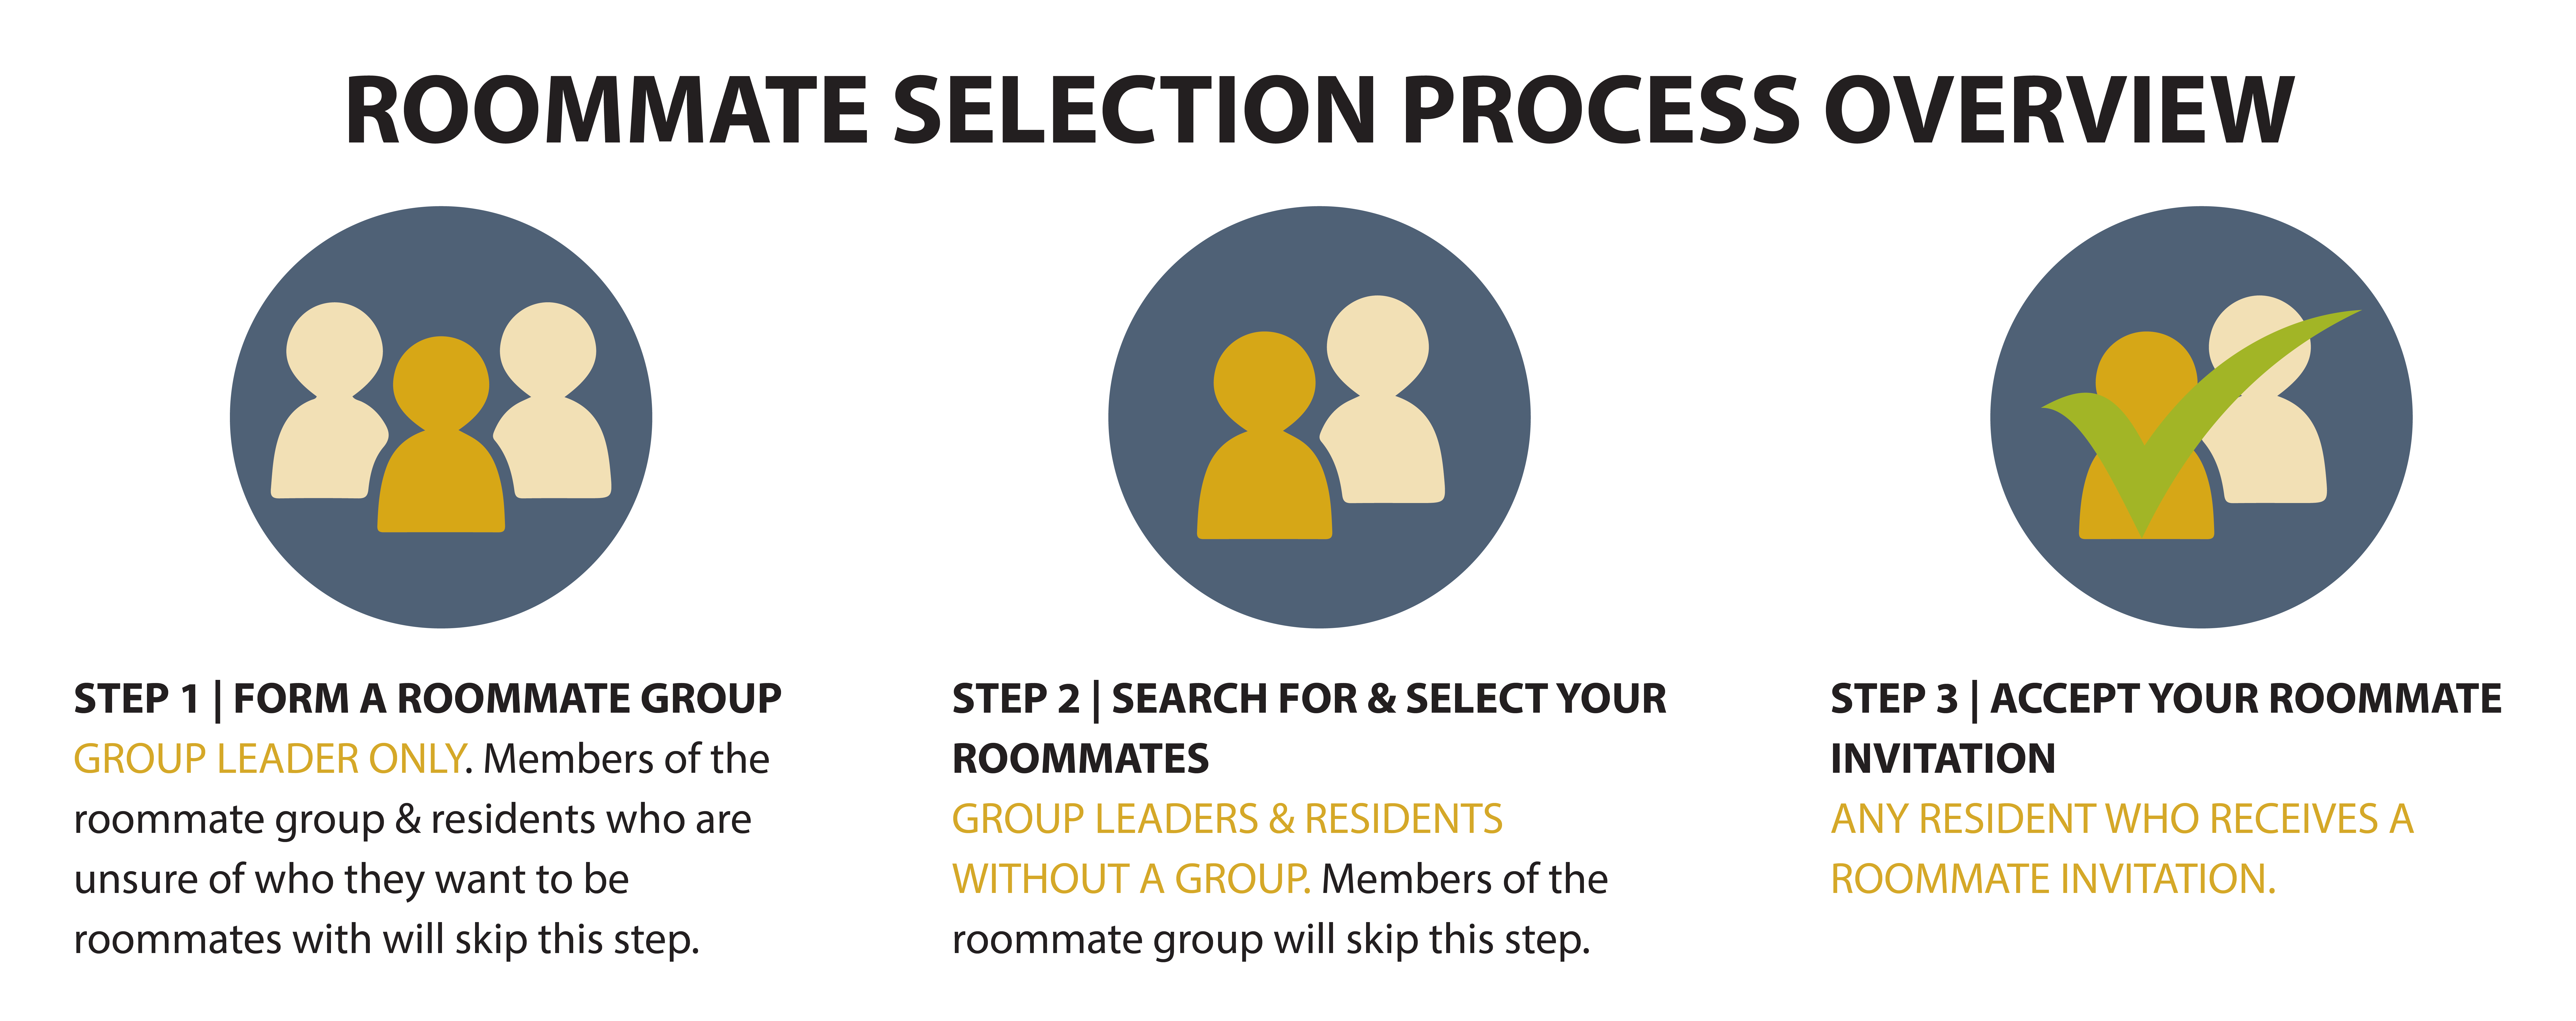 Step 1 - Form a roommate group (group leader only), Step 2 - Search for and select your roommates (group leader and residents without a group), Step 3 - Accept your roommate invitation - any resident who receives a roommate invitation